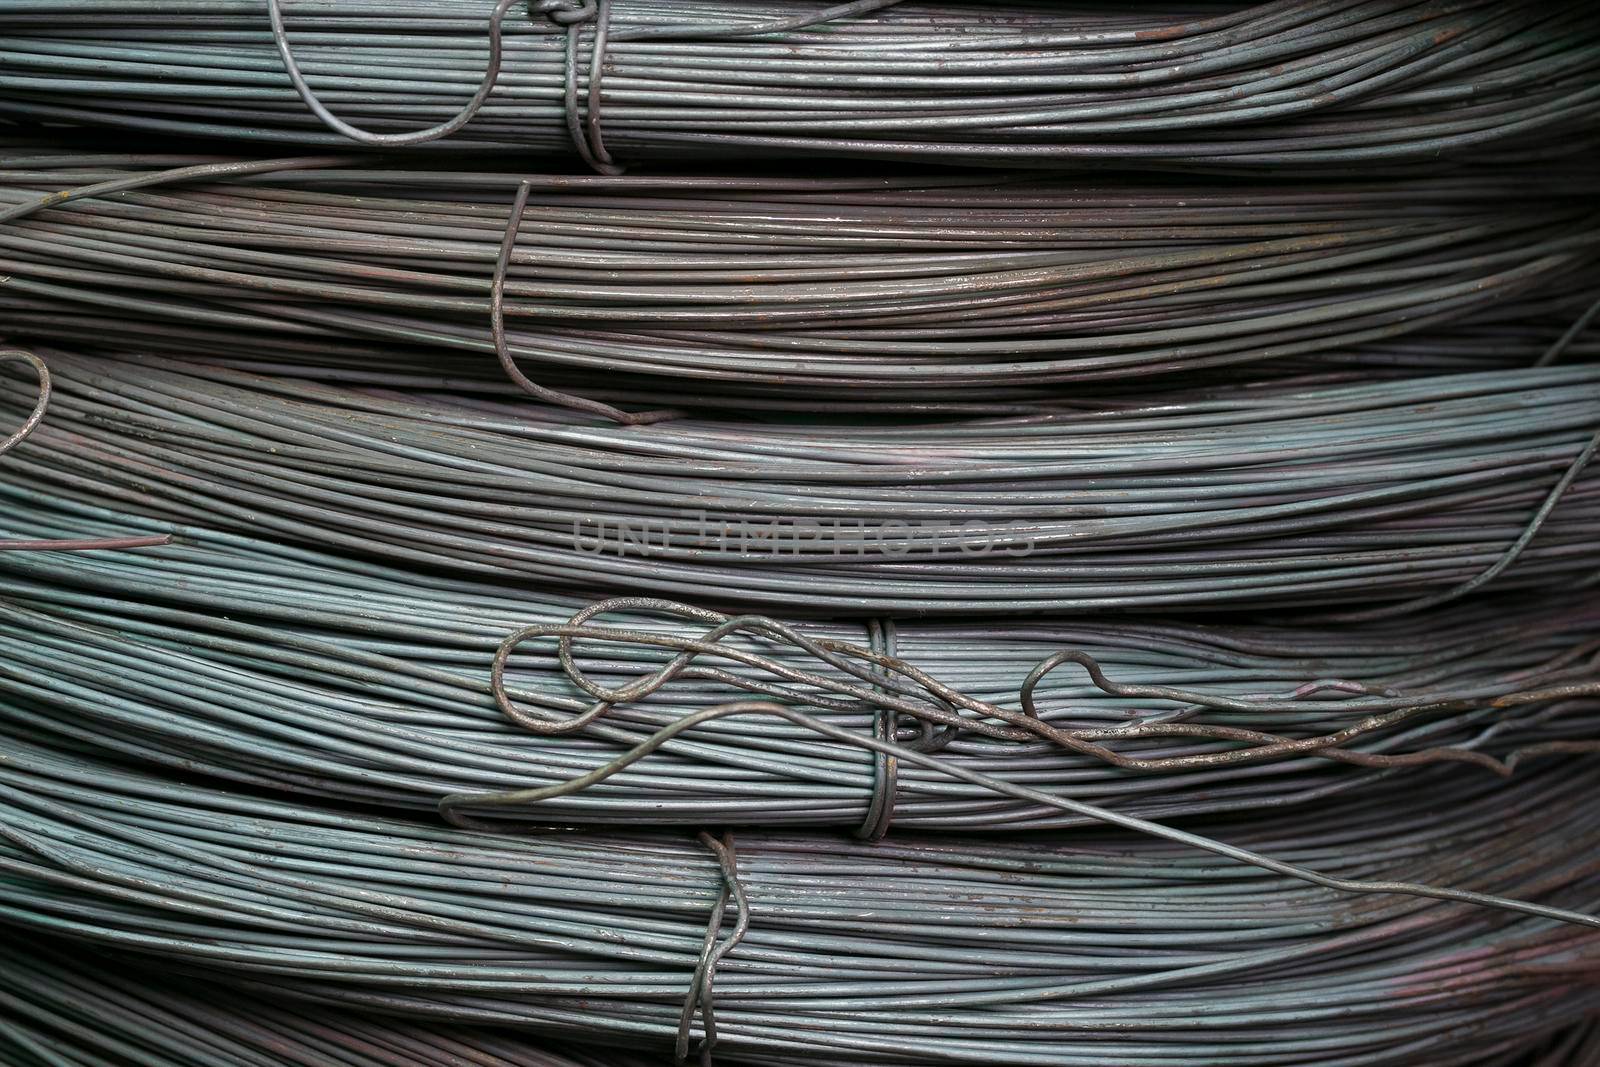 The steel bars used in construction